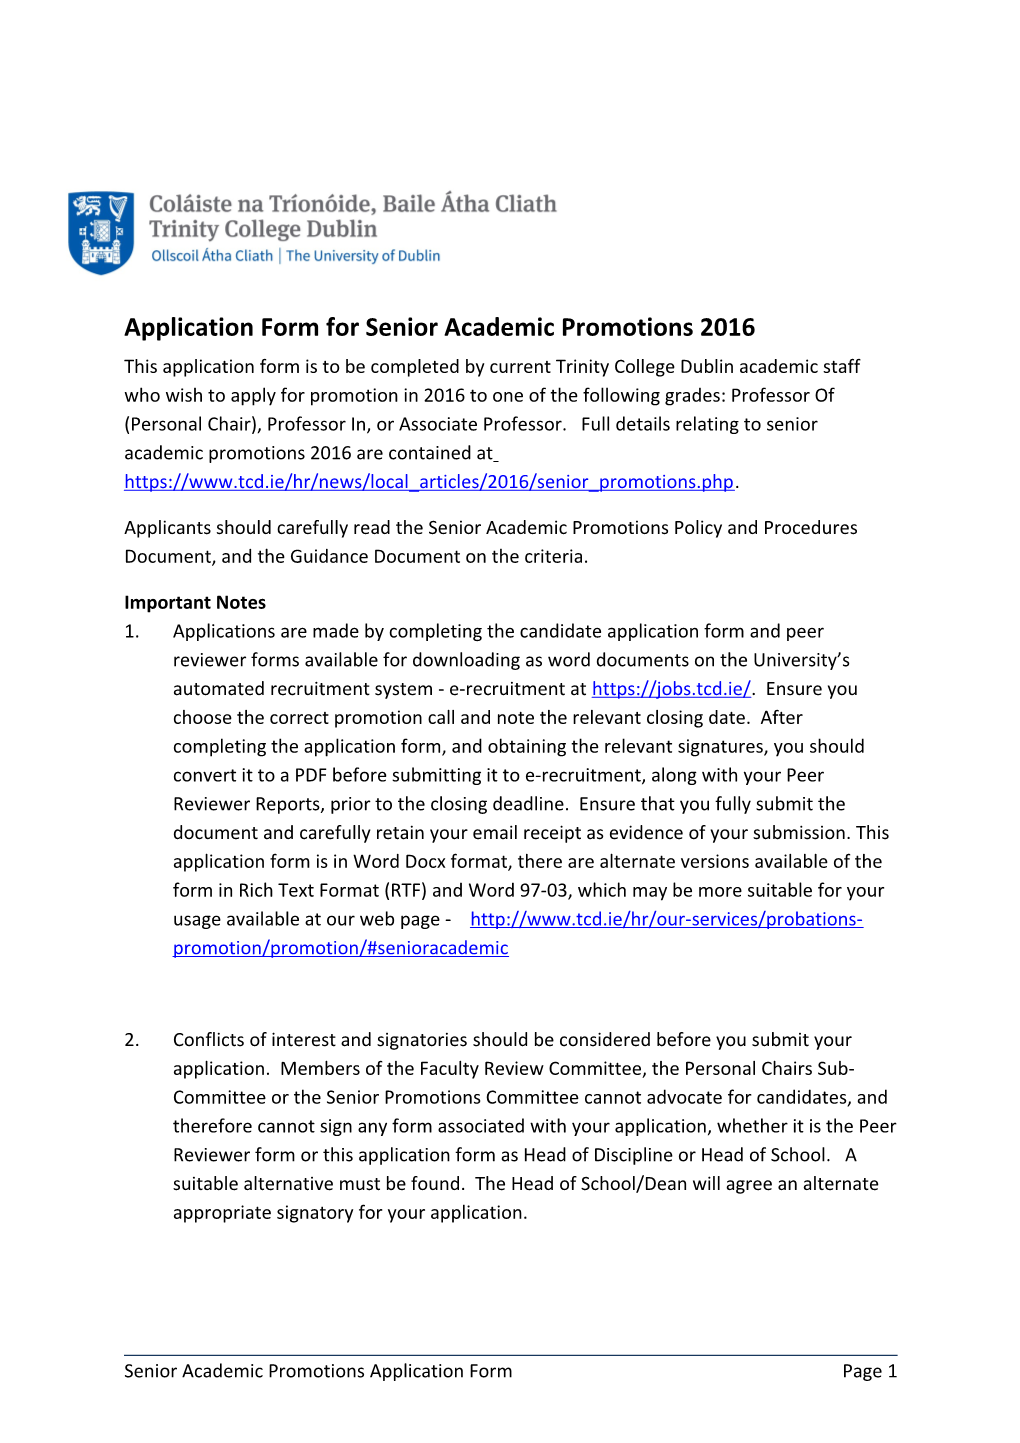 Application Form for Senior Academic Promotions 2016